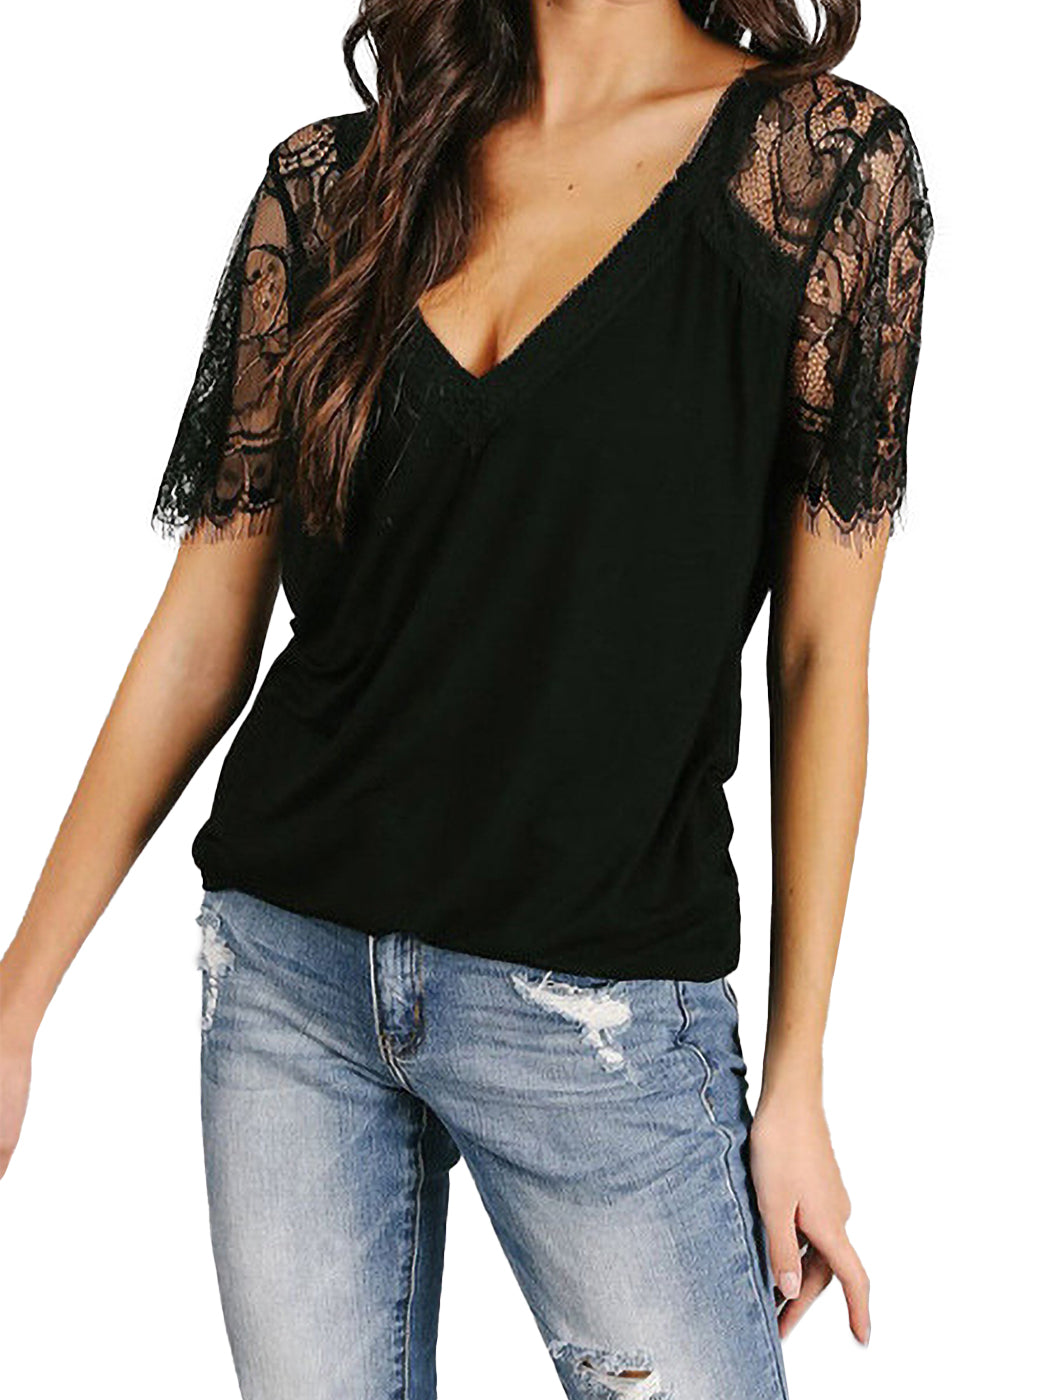 Lace Short Sleeve T-Shirt V Neck Cotton Summer Casual Tops Tee Shirts